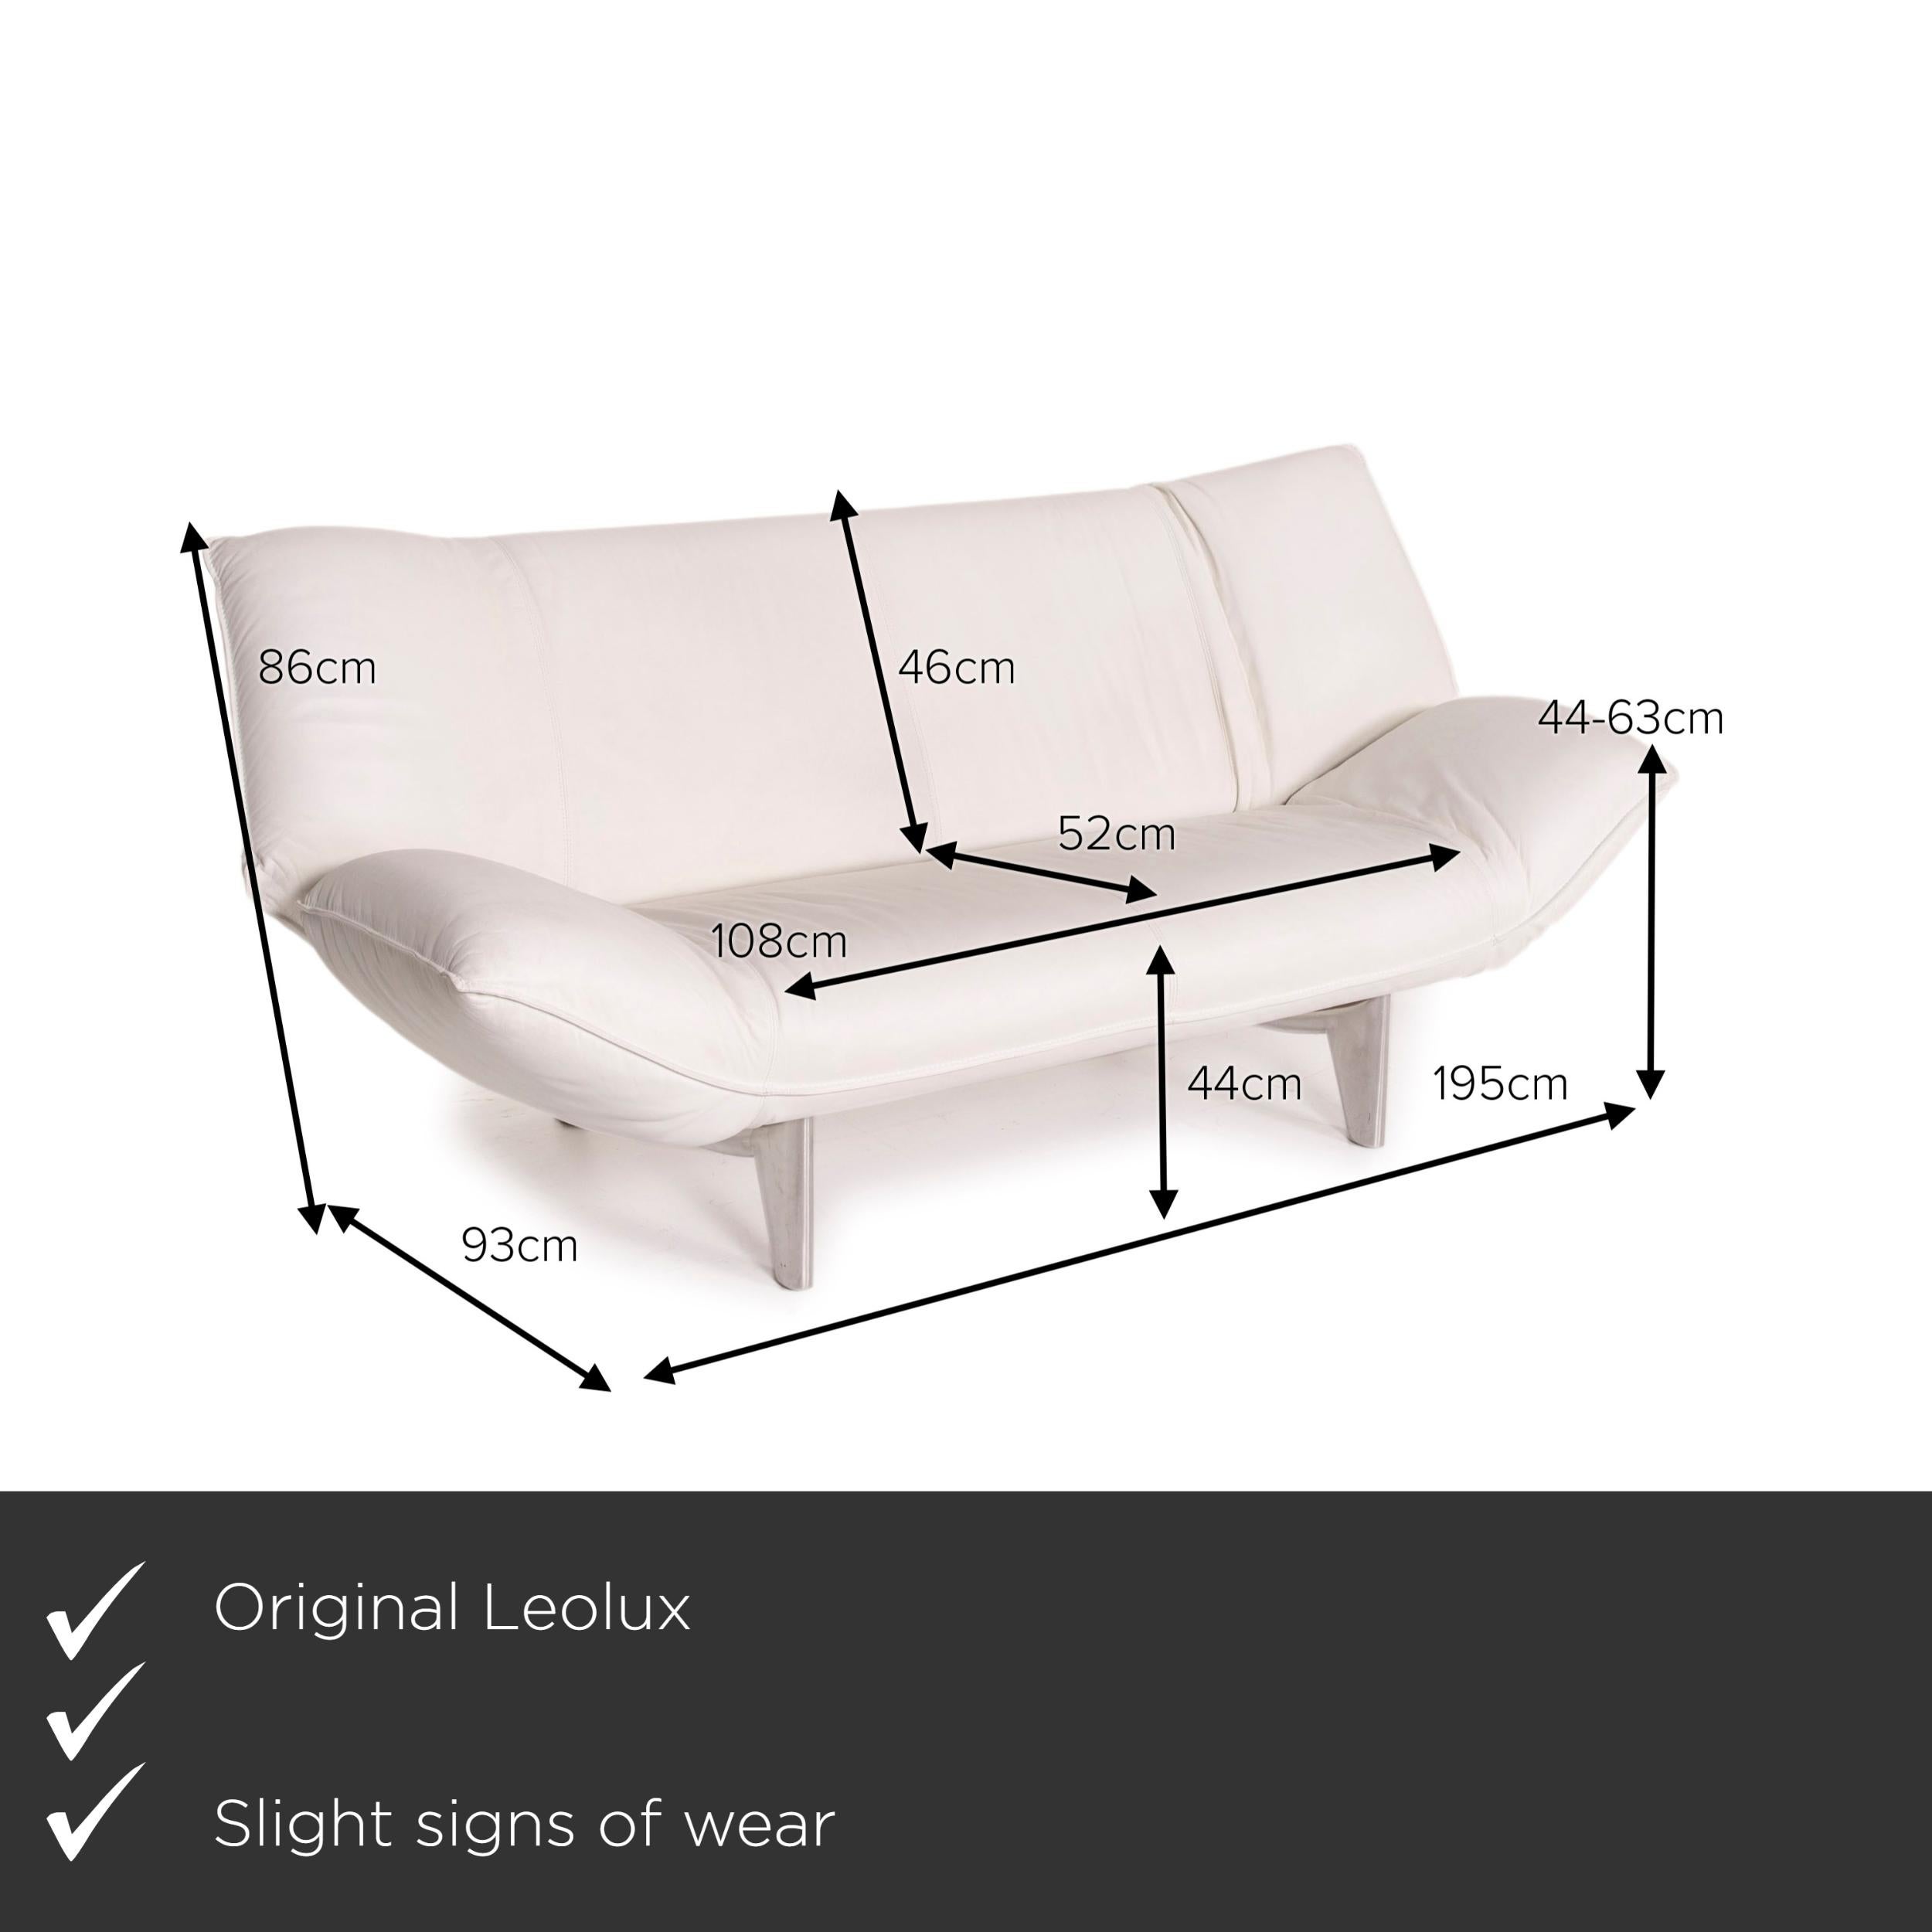 We present to you a Leolux Tango leather sofa white two-seater function.


 Product measurements in centimeters:
 

Depth: 93
Width: 195
Height: 86
Seat height: 44
Rest height: 44
Seat depth: 52
Seat width: 108
Back height: 46.
  